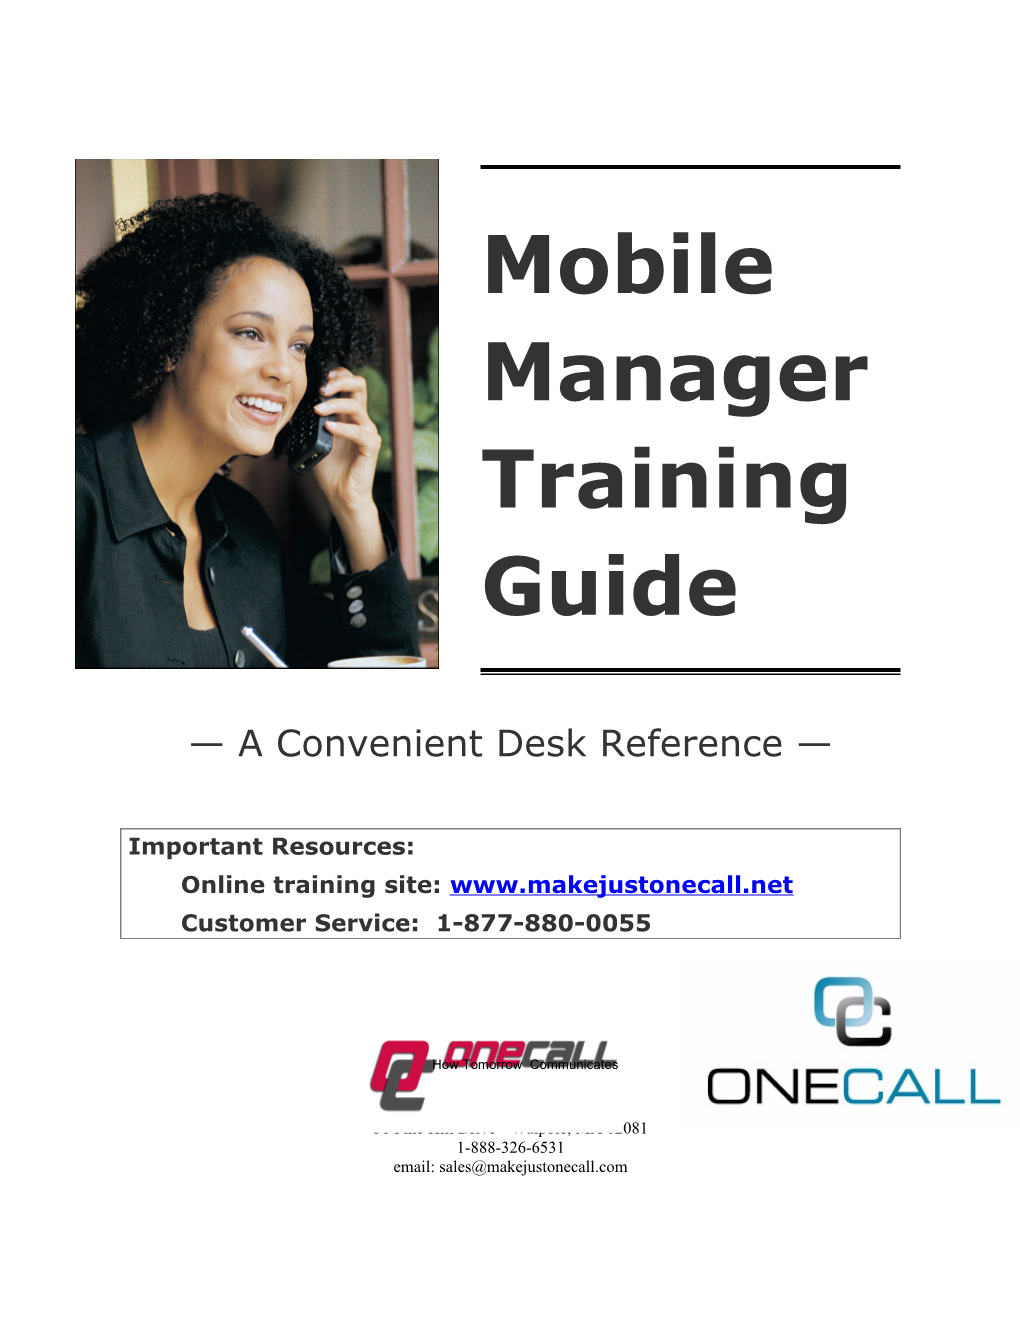 Onecall Mobile Manager Training Guide 1